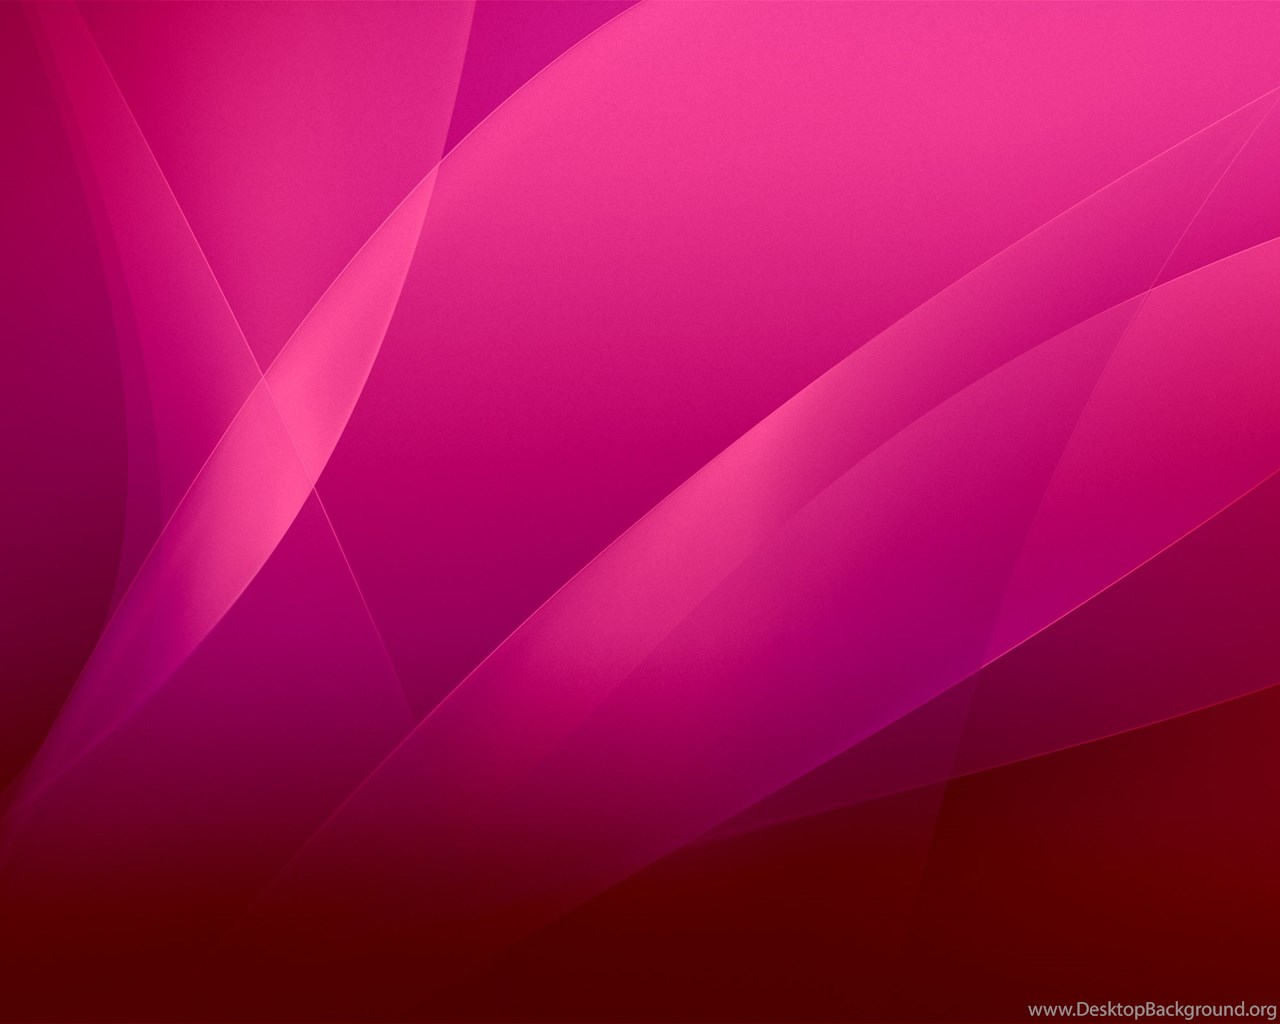 Download Pink Backgrounds 124Z Awesome HD Full Size Attachment Popular 1280...